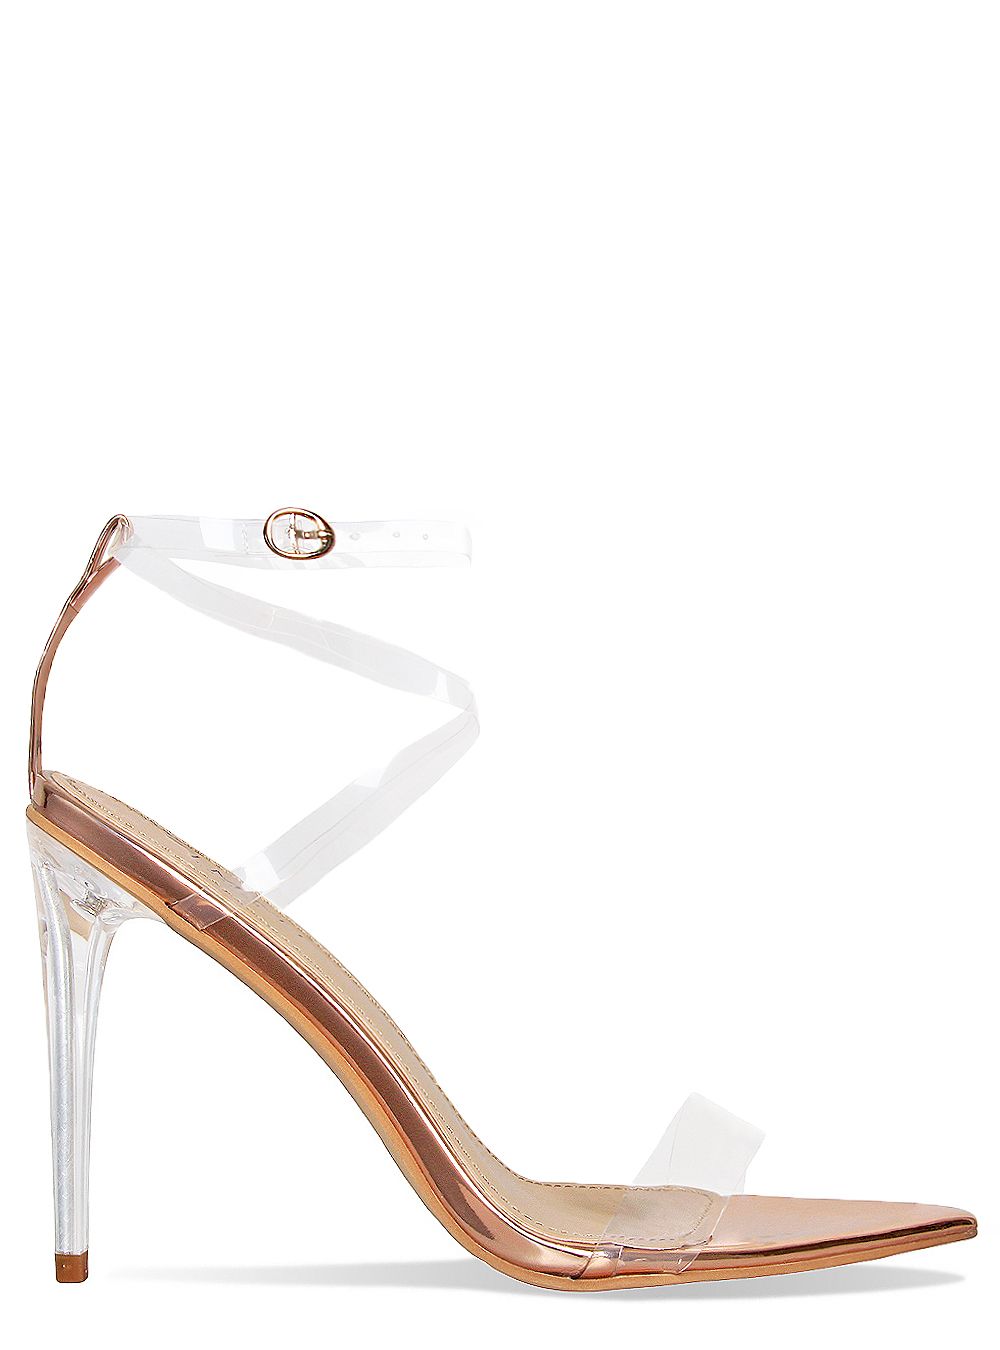 Cassie Rose Gold Pointed Toe Clear Heels